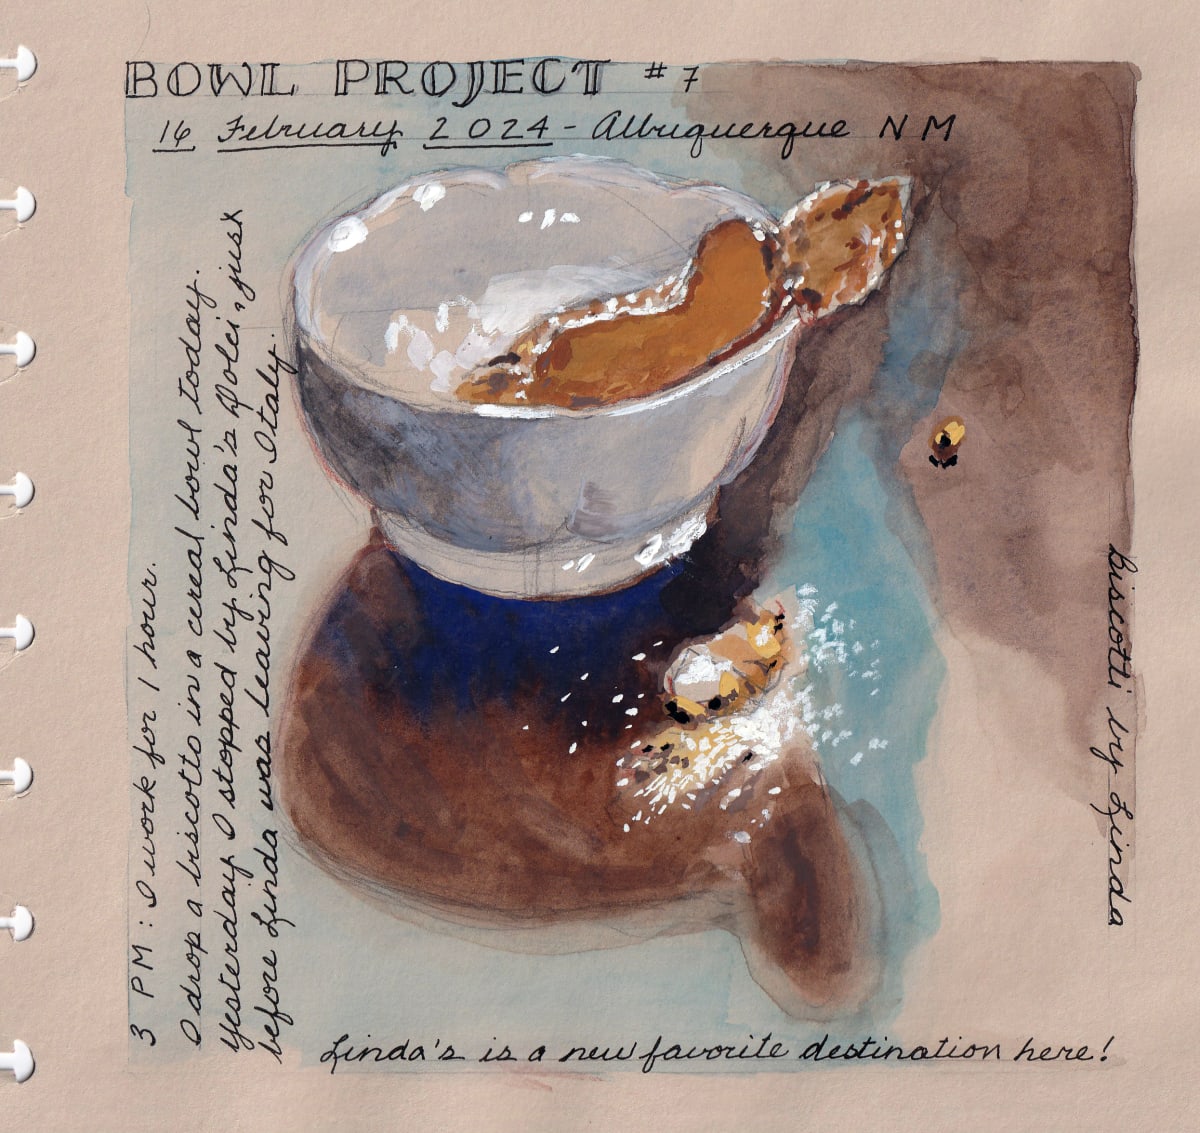 Journey Daybook Page by Margaret Pulis Herrick (Peggy)  Image: Bowl Project #7: Bowl with Biscotto